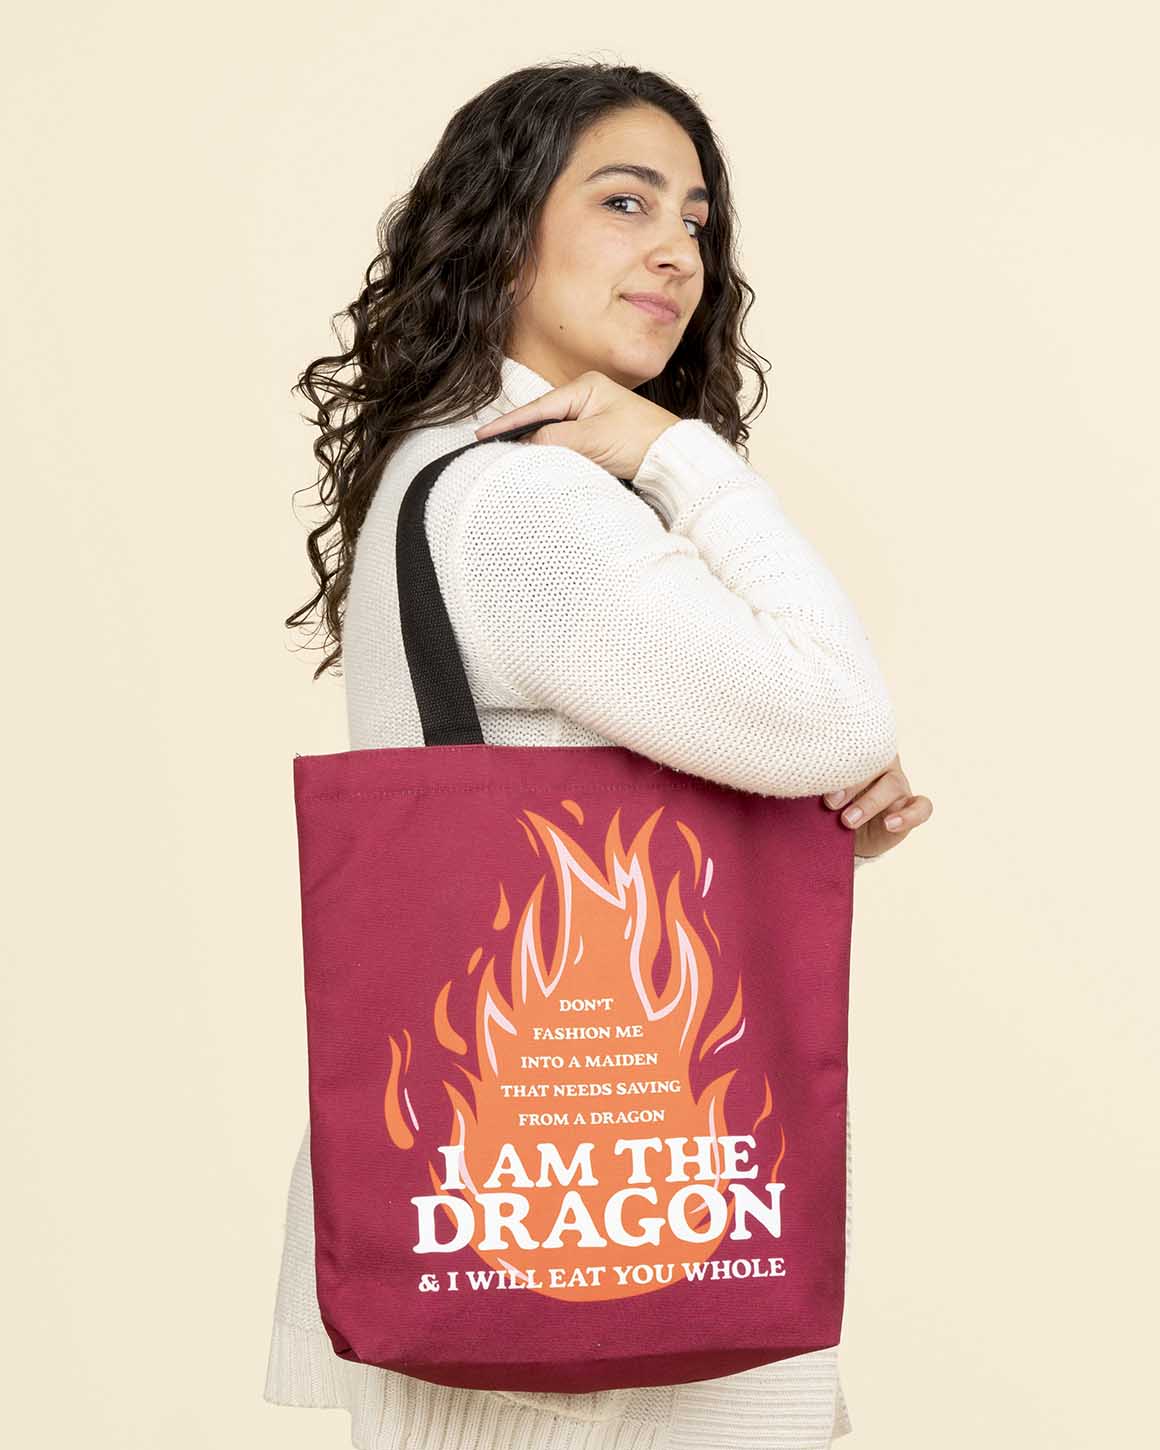 Empowering feminist tote bag with a flame and vibrant red color